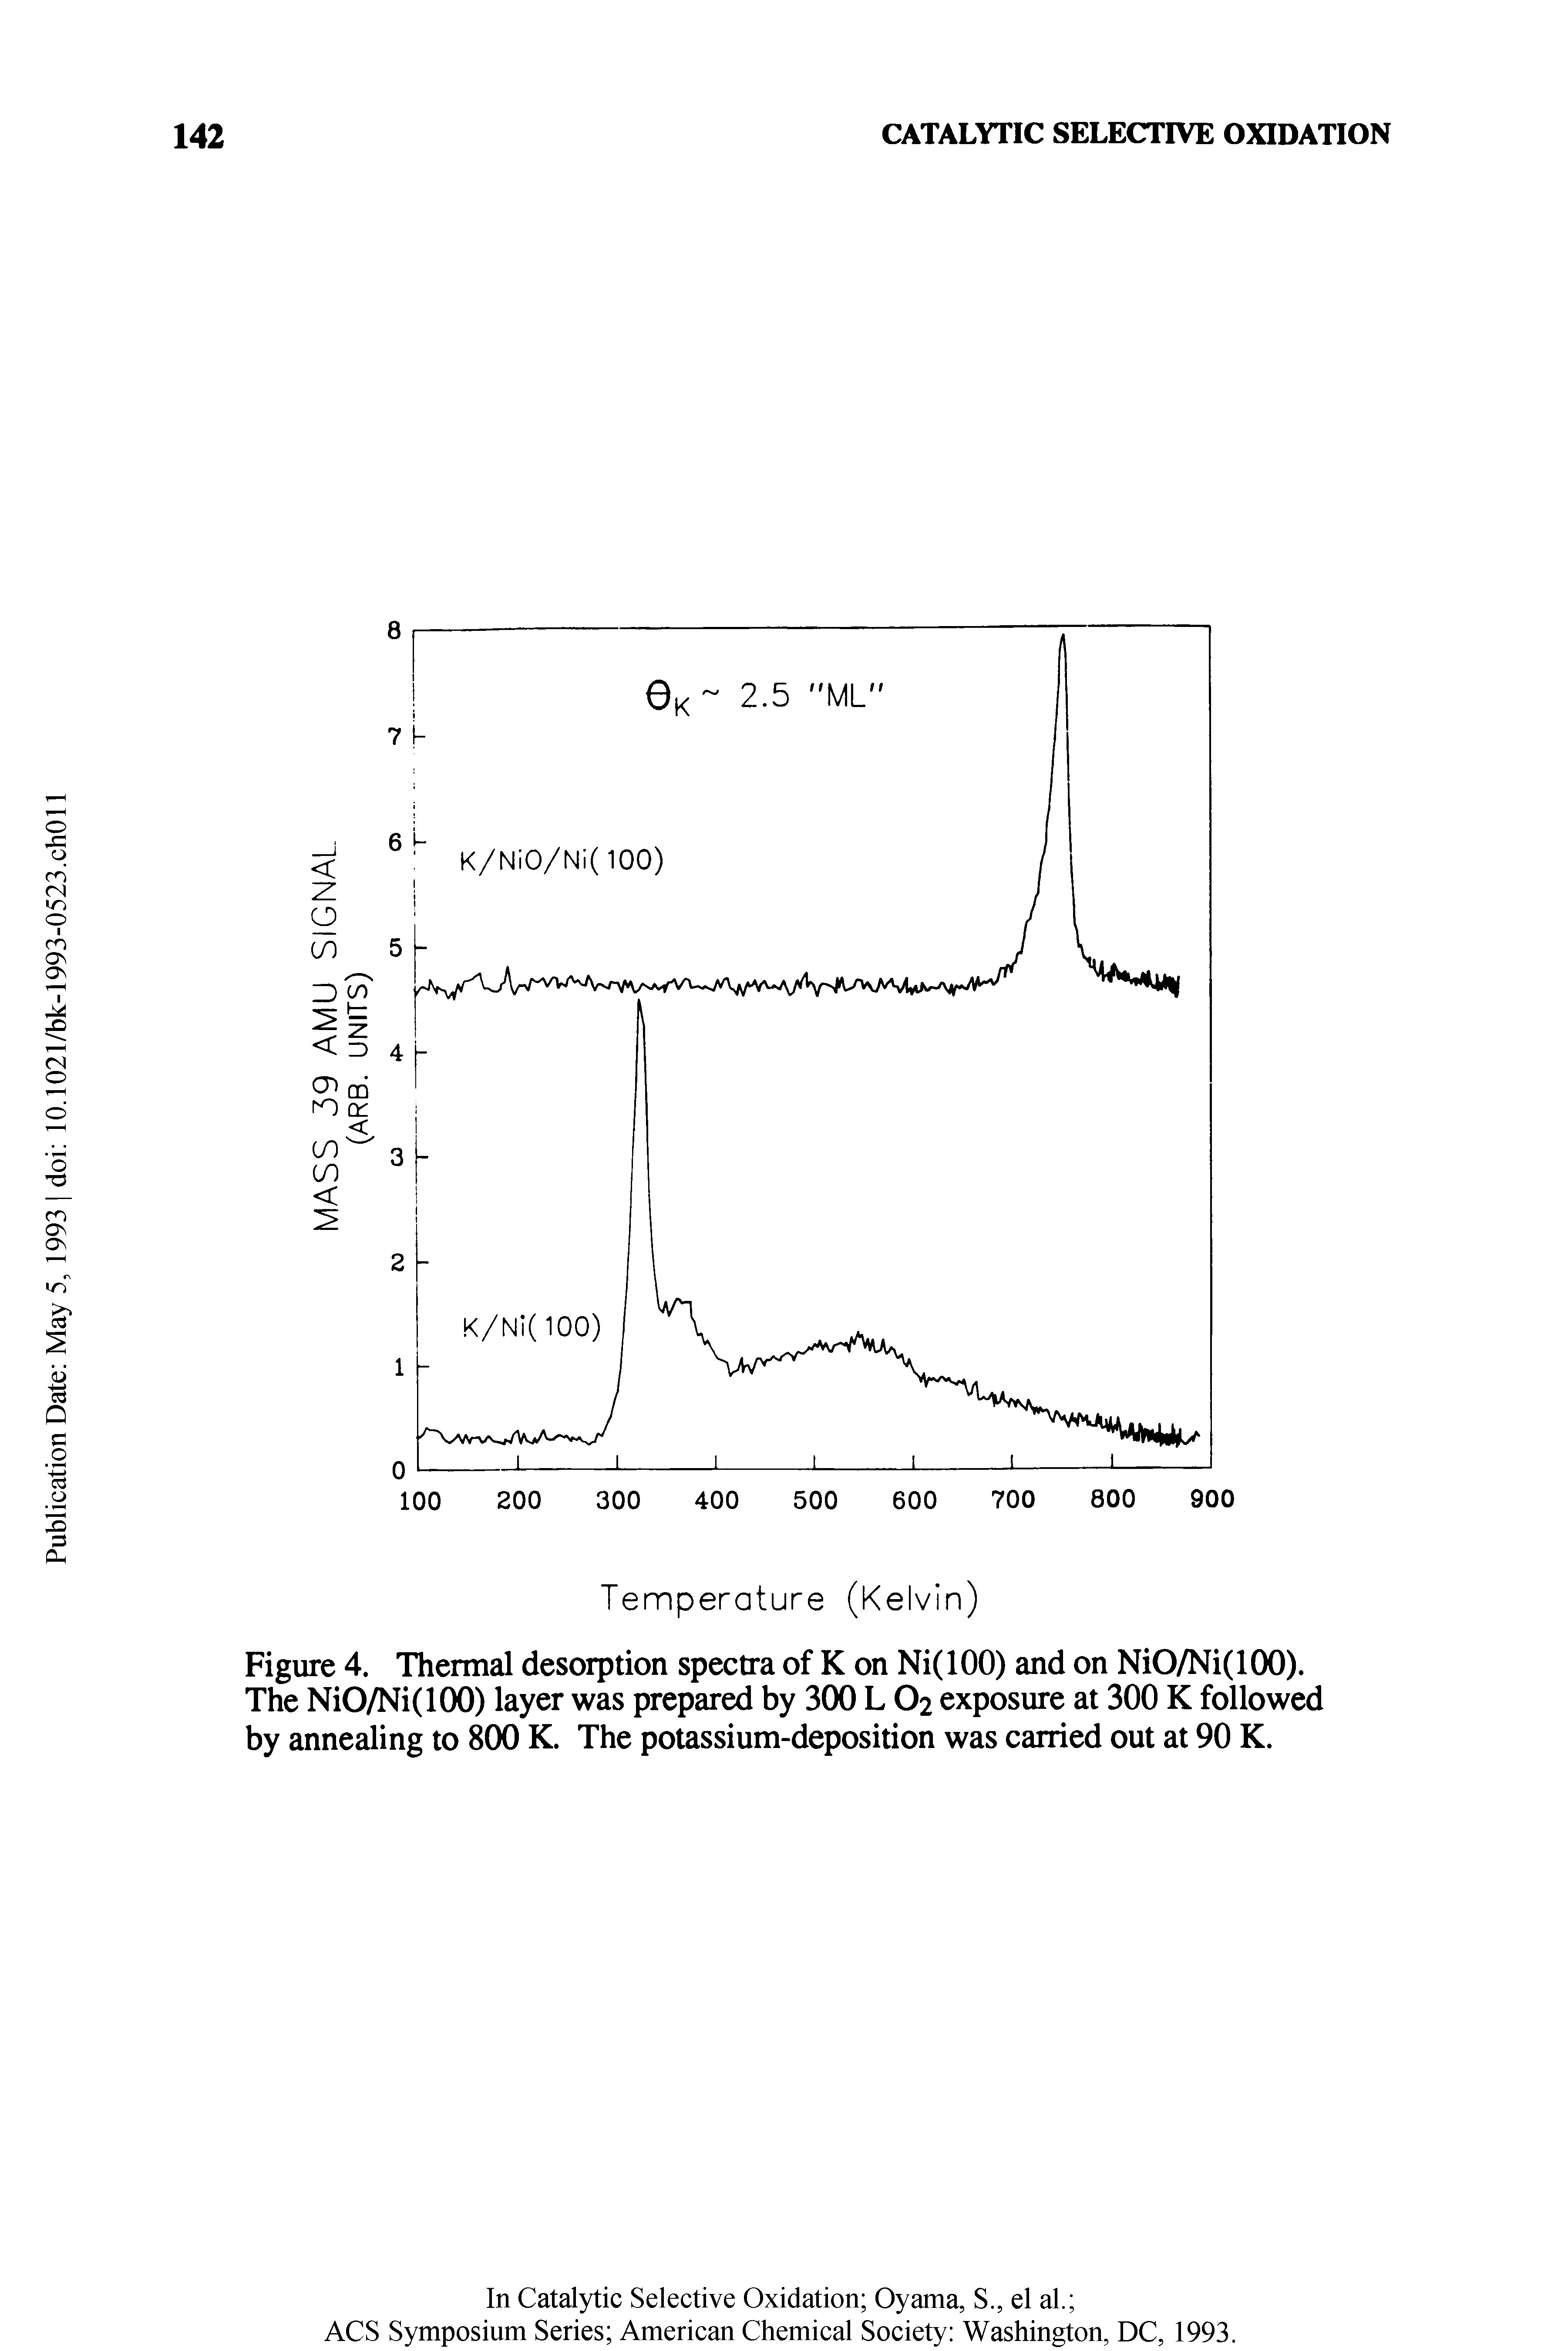 Figure 4. Thermal desorption spectra of K on Ni(lOO) and on NiO/Ni(100). The NiO/Ni(100) layer was prepared by 300 L O2 exposure at 300 K followed by annealing to 800 K. The potassium-deposition was carried out at 90 K.